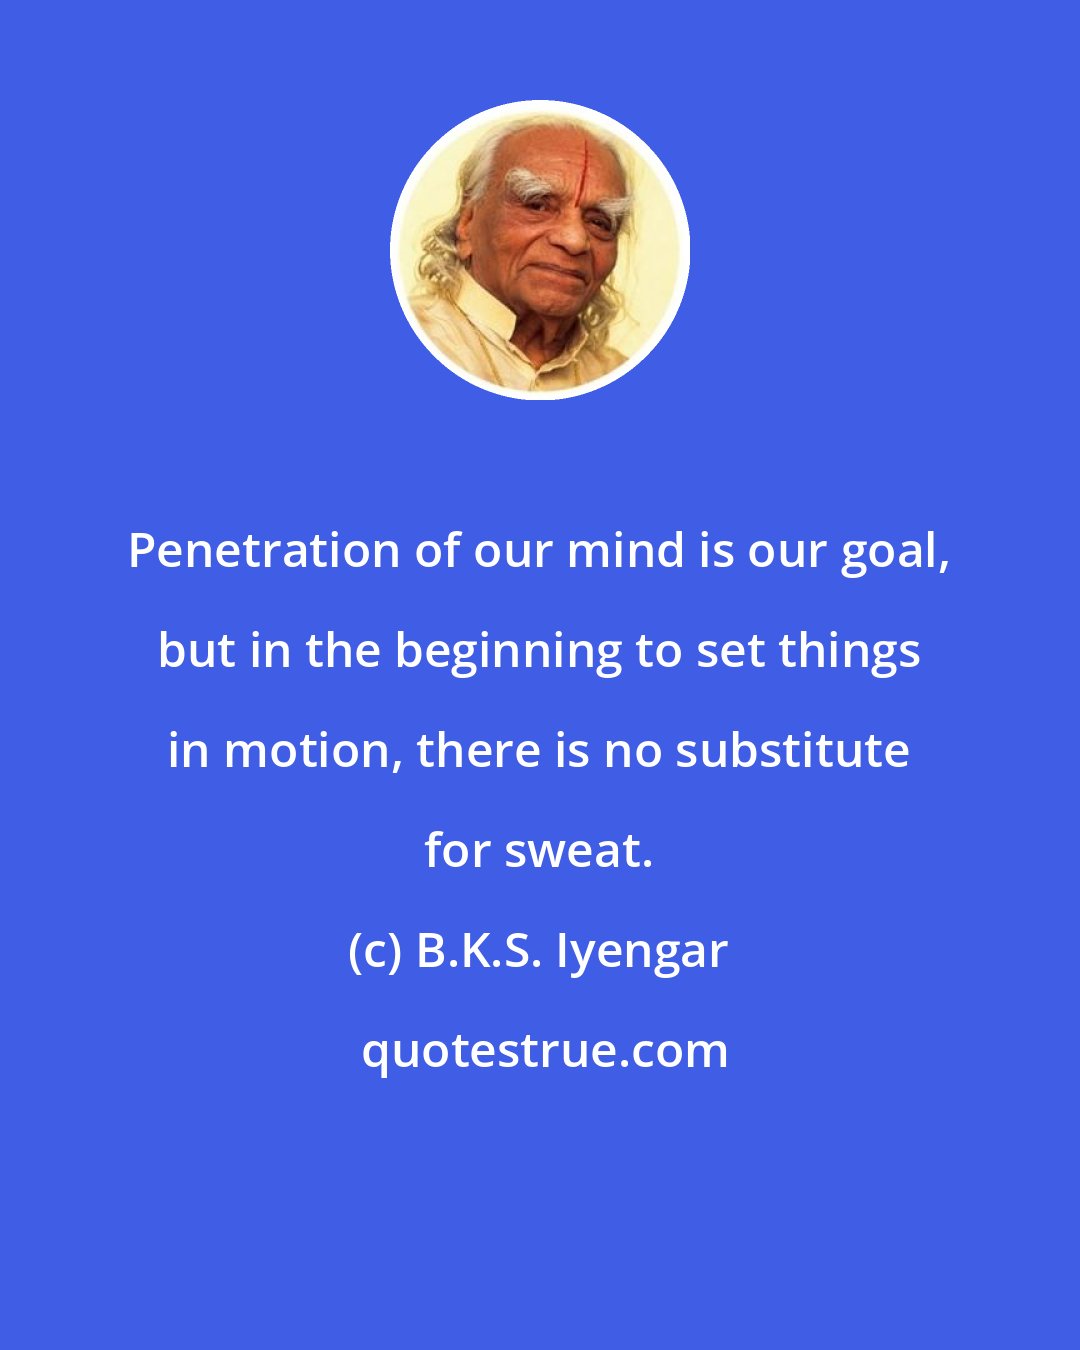 B.K.S. Iyengar: Penetration of our mind is our goal, but in the beginning to set things in motion, there is no substitute for sweat.